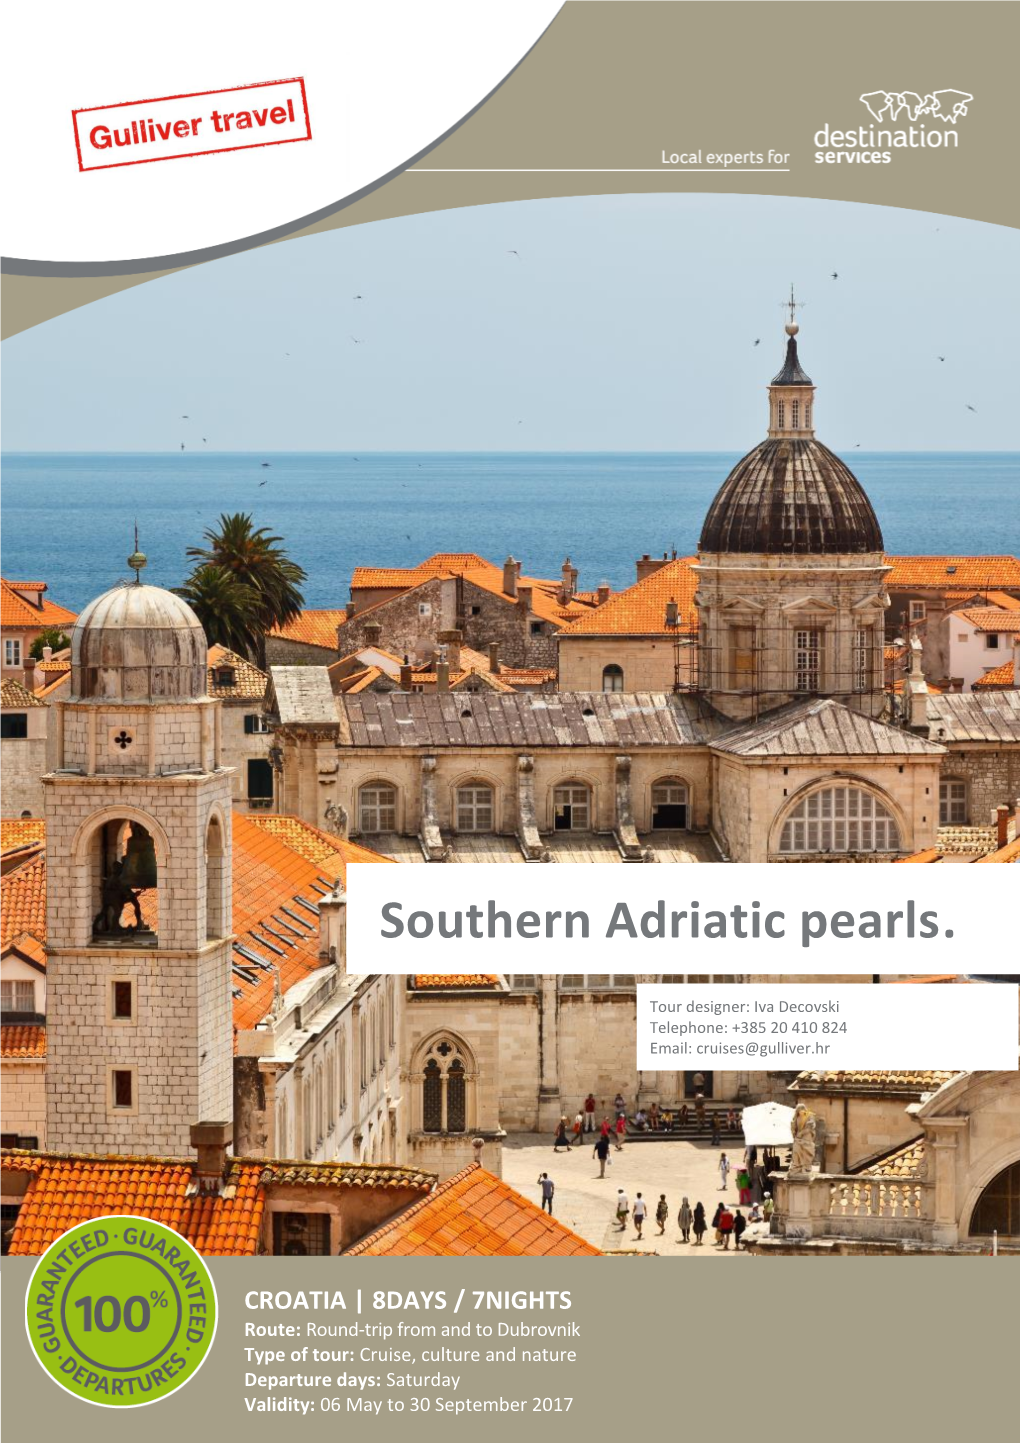 Southern Adriatic Pearls